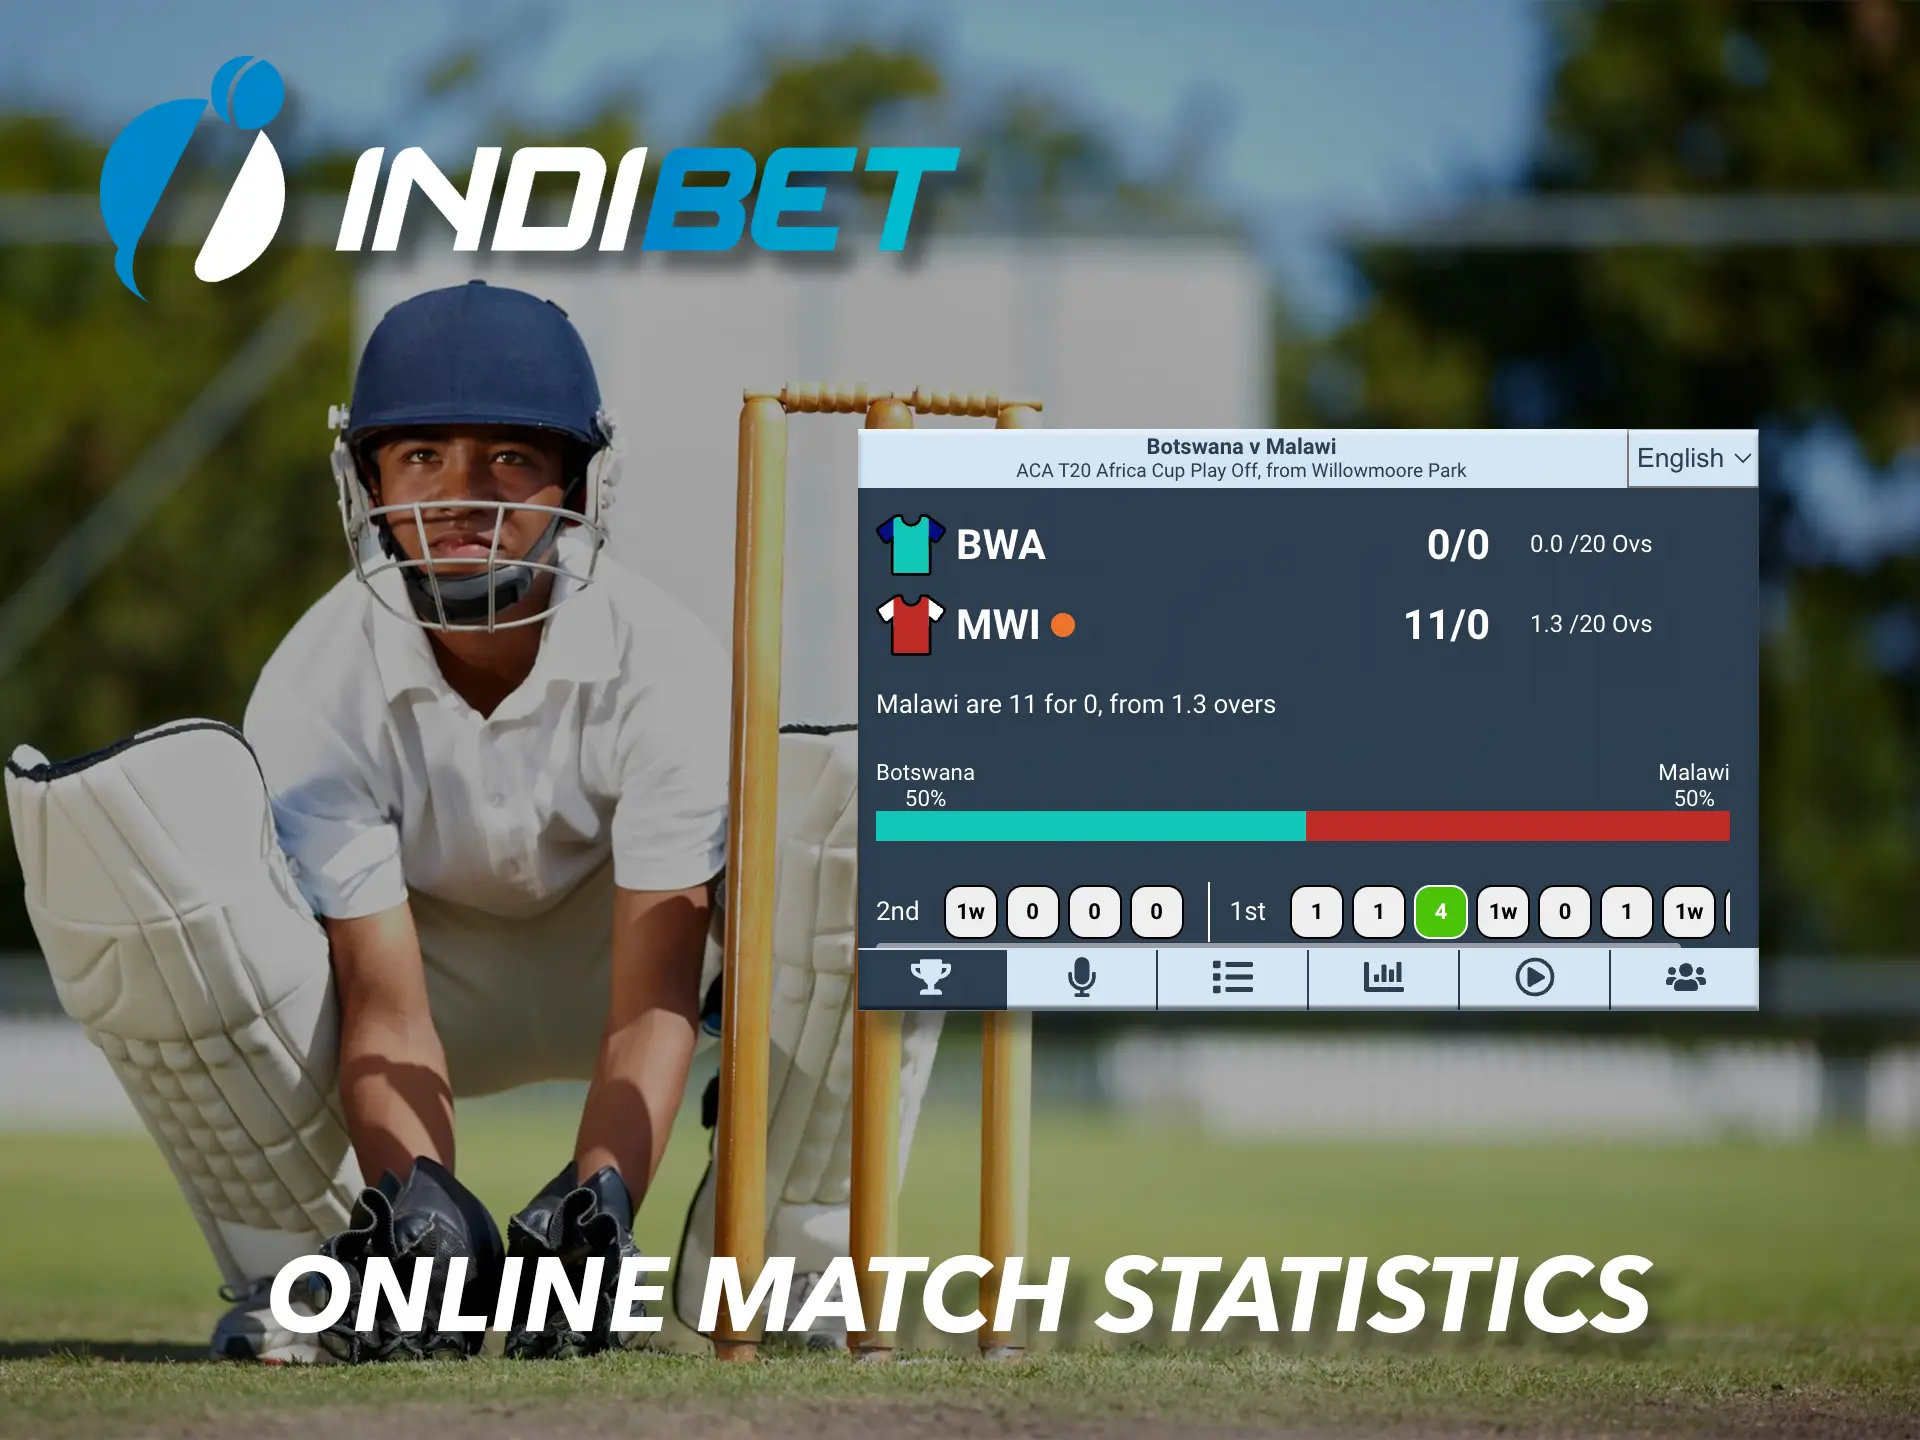 Follow the match statistics as the games are live streamed on Indibet.